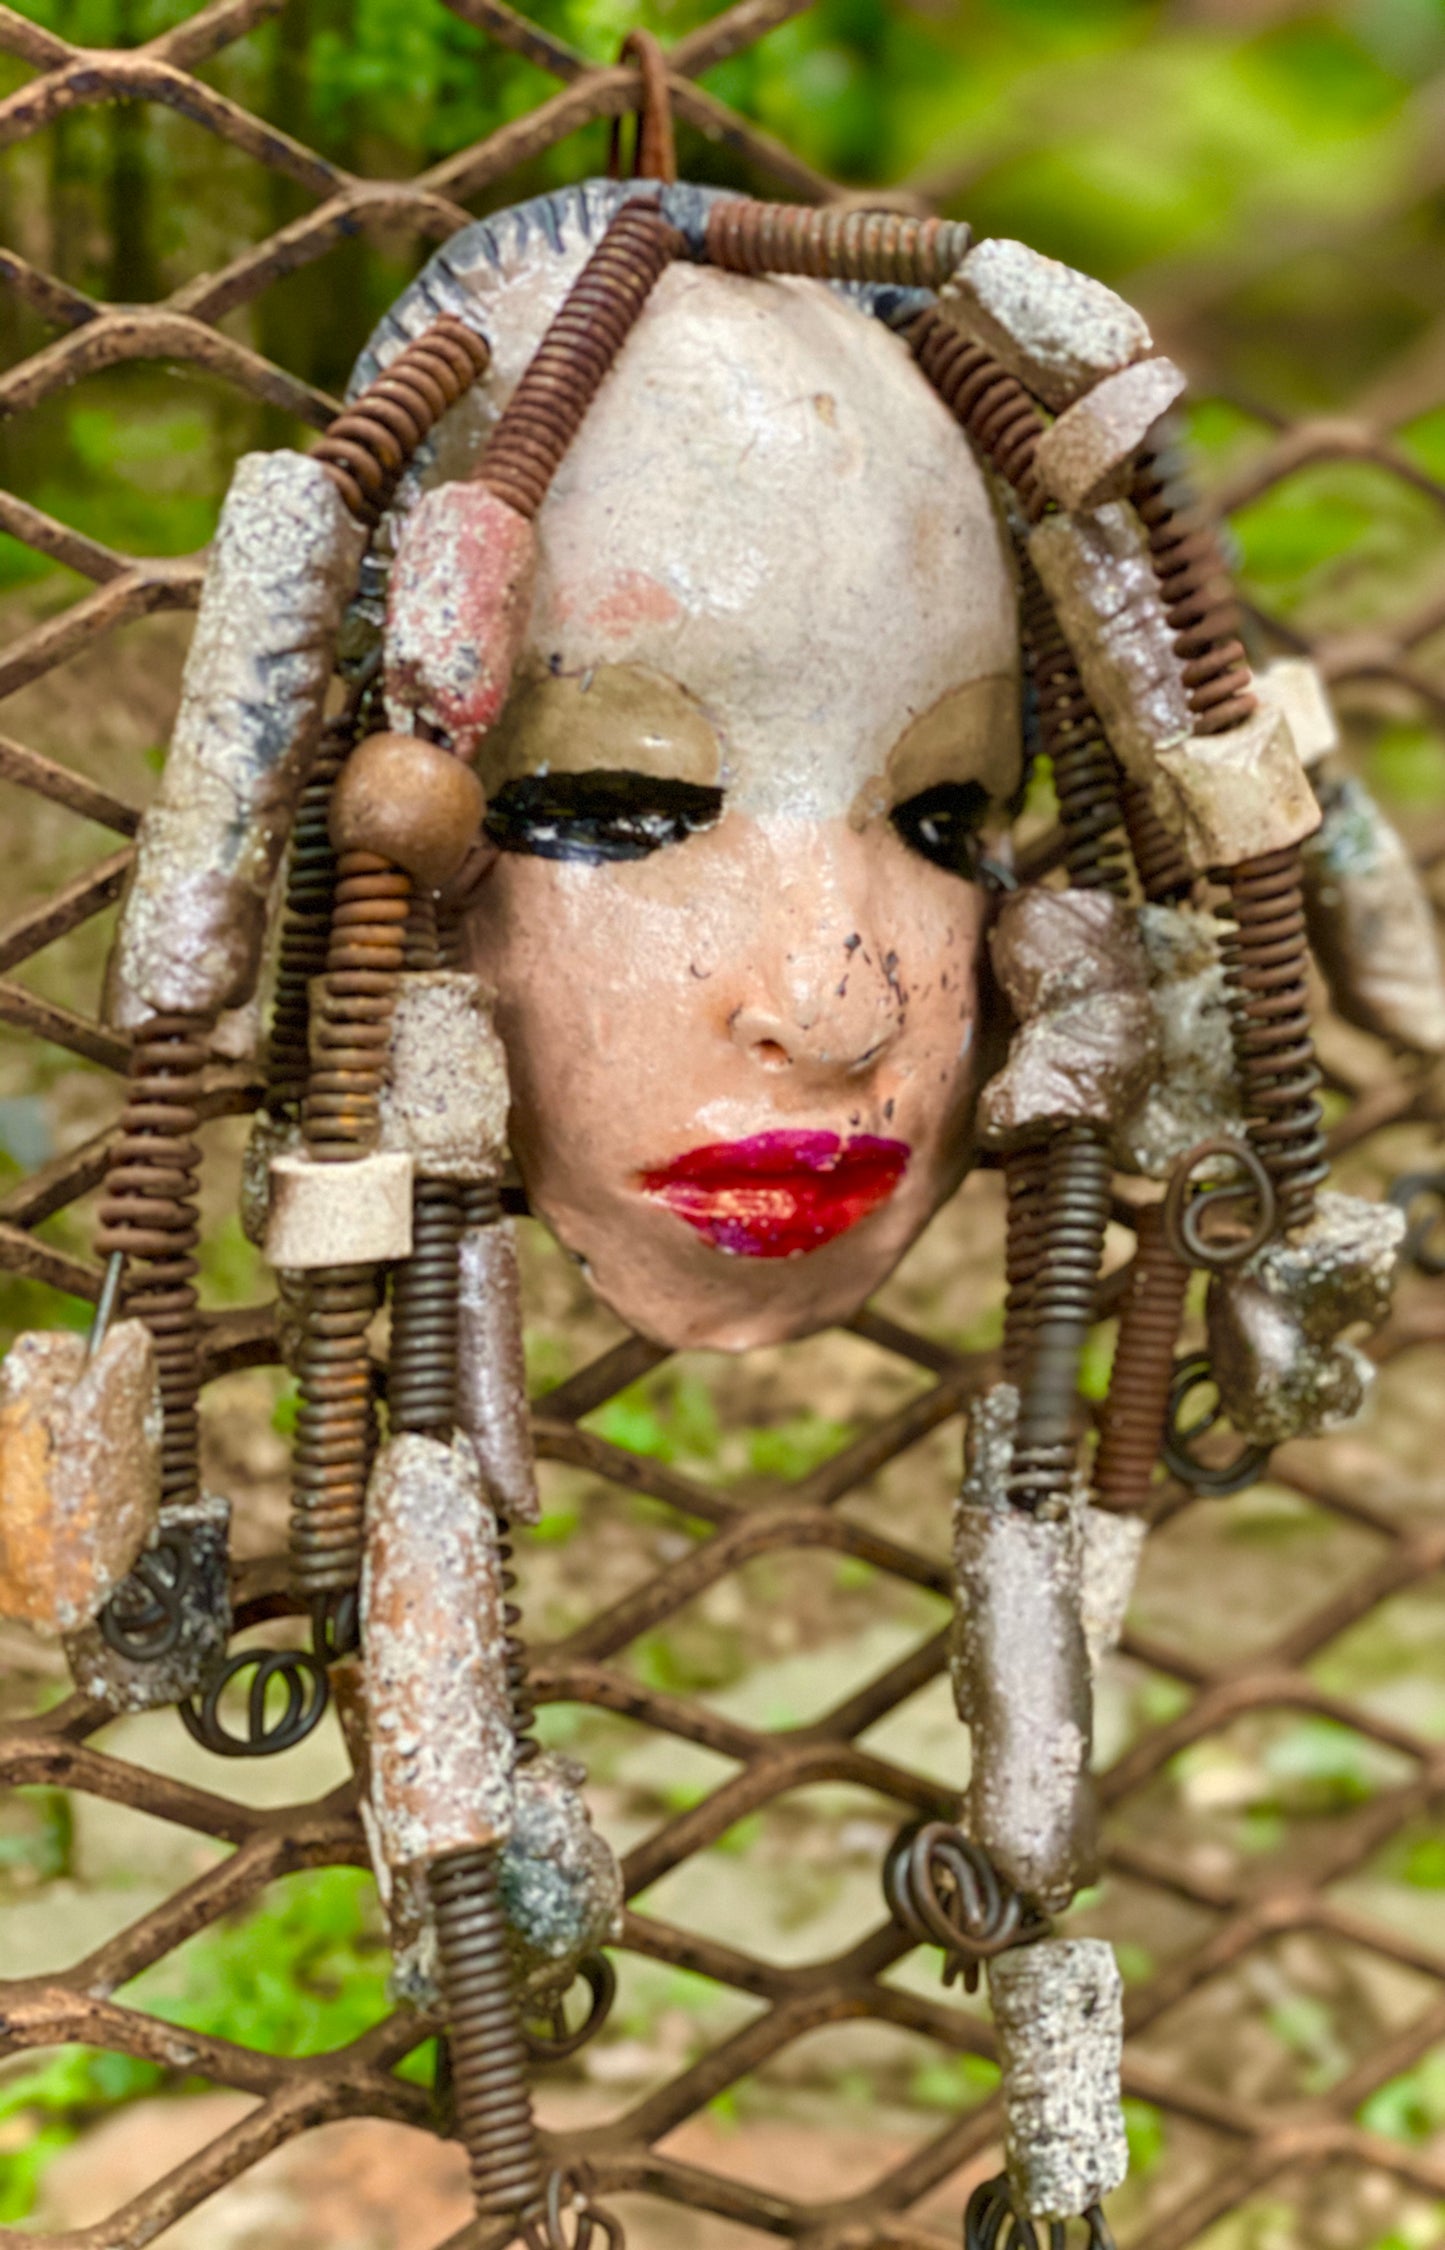 I started making art soon after seeing authentic African artwork at the Smithsonian Museum of African Art. I was in total awe. Ireland was inspired by my visit there.  Ireland weighs 13 ozs. Her face is formed with hand coiled wire and raku beads Ireland's  face  is two tone and beams with pale pink crackle glaze and ruby red lips.